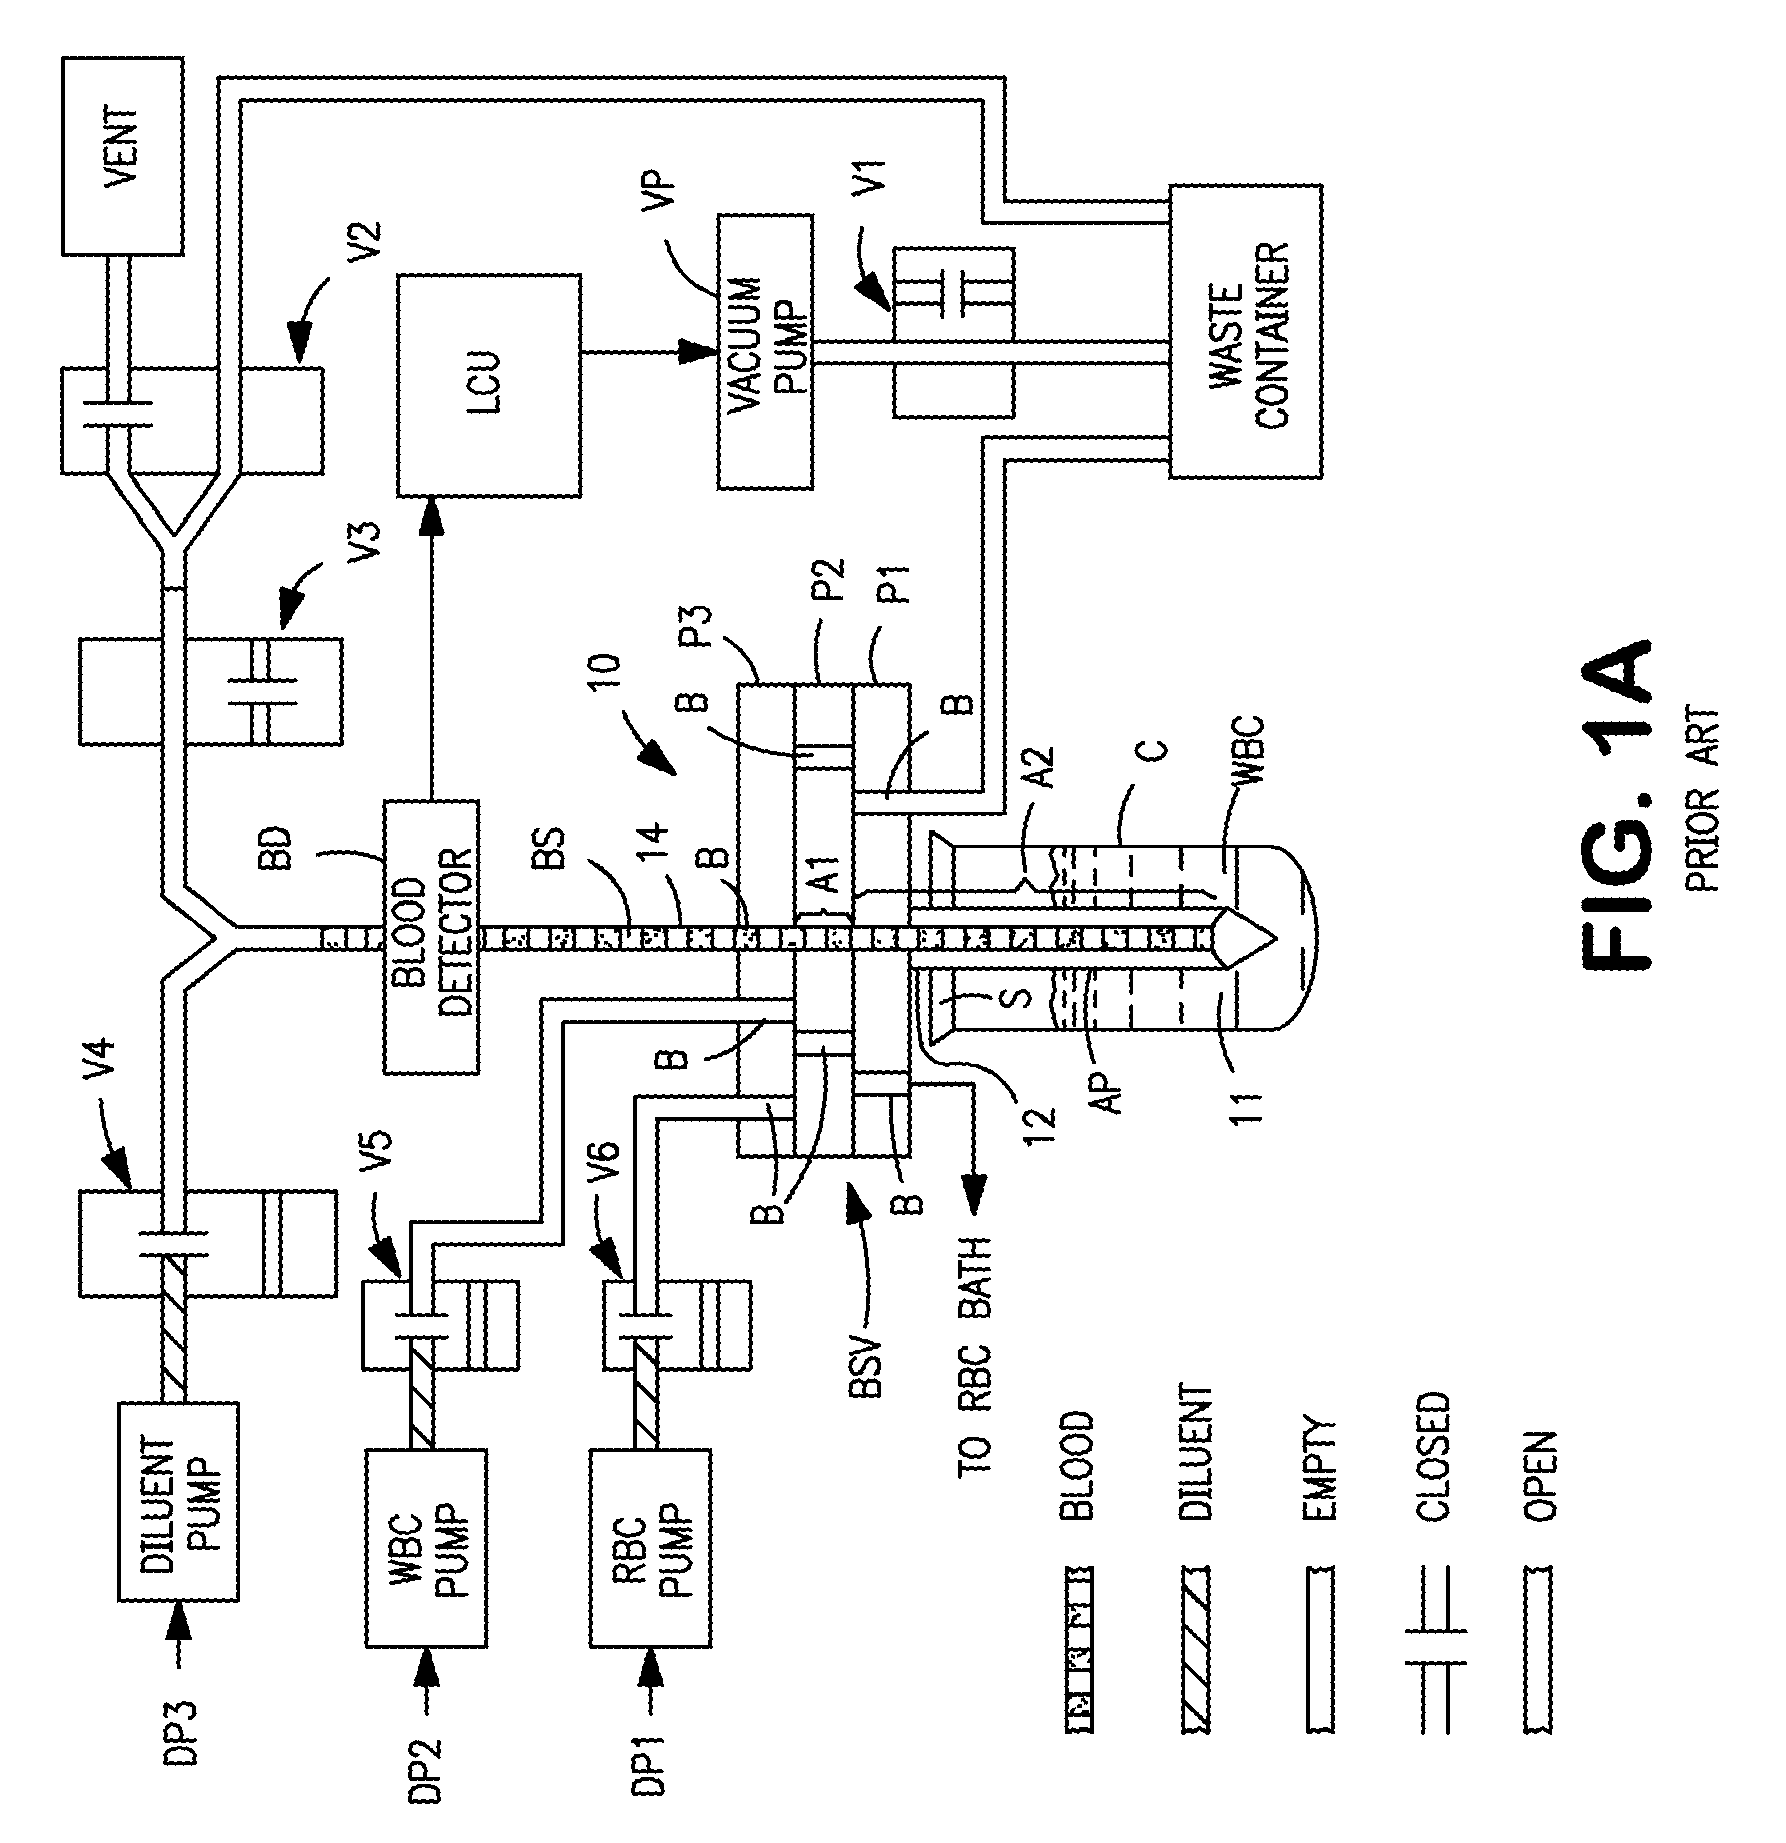 Apparatus for Aspirating and Dispensing Liquids in an Automated Analyzer